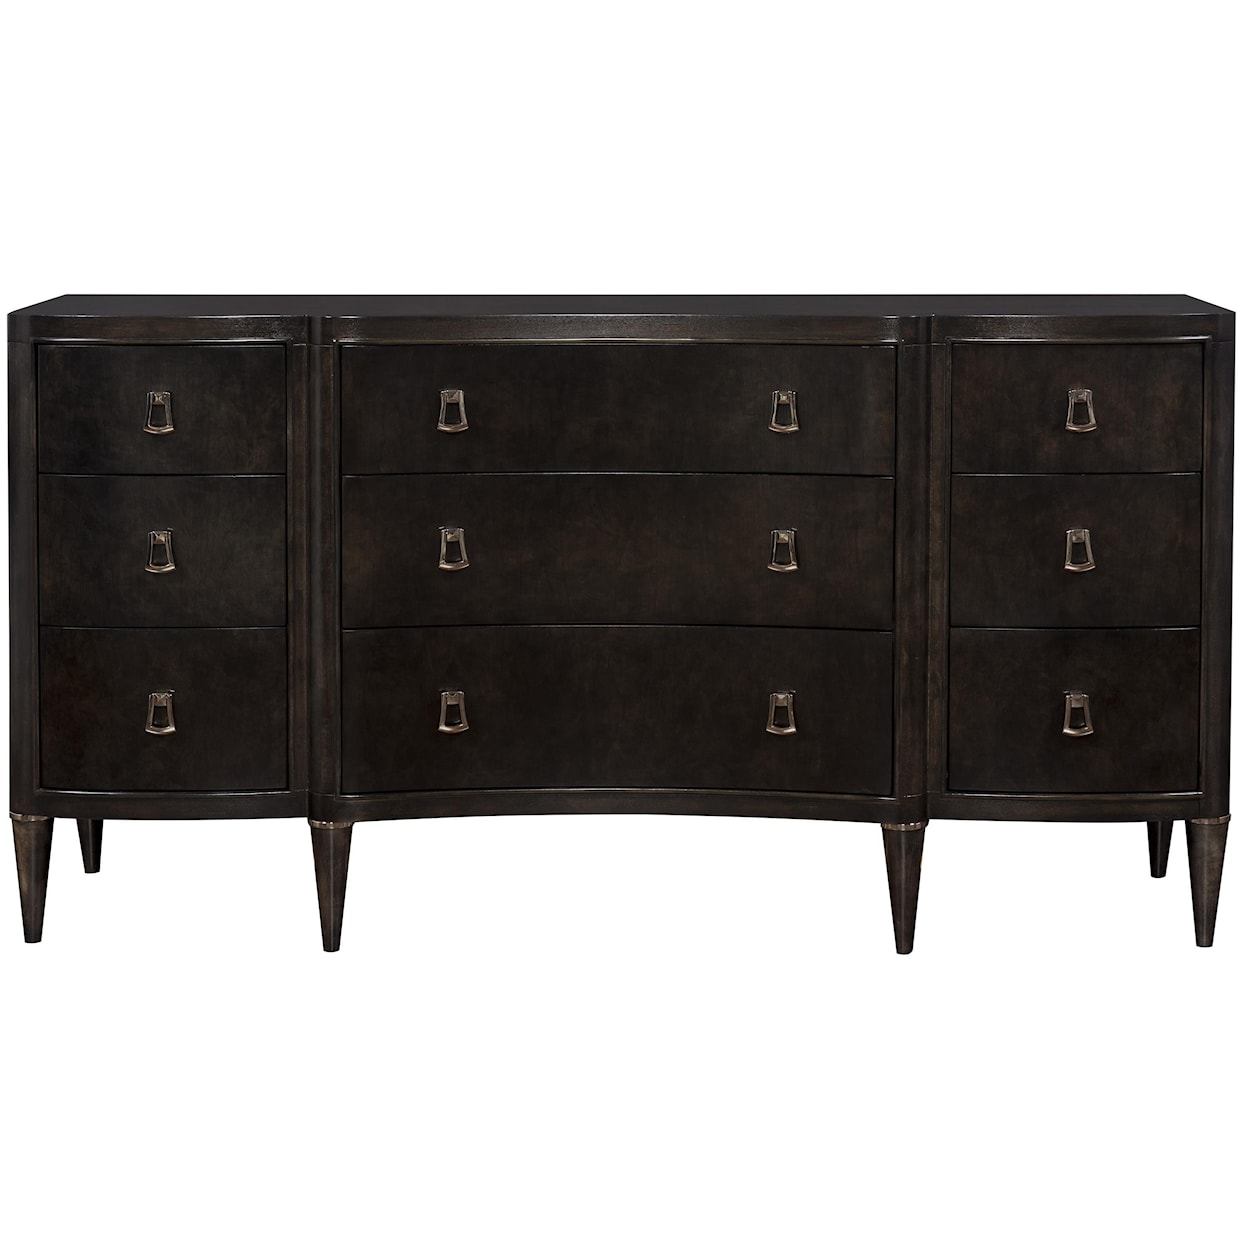 Vanguard Furniture Lillet Chest of Drawers